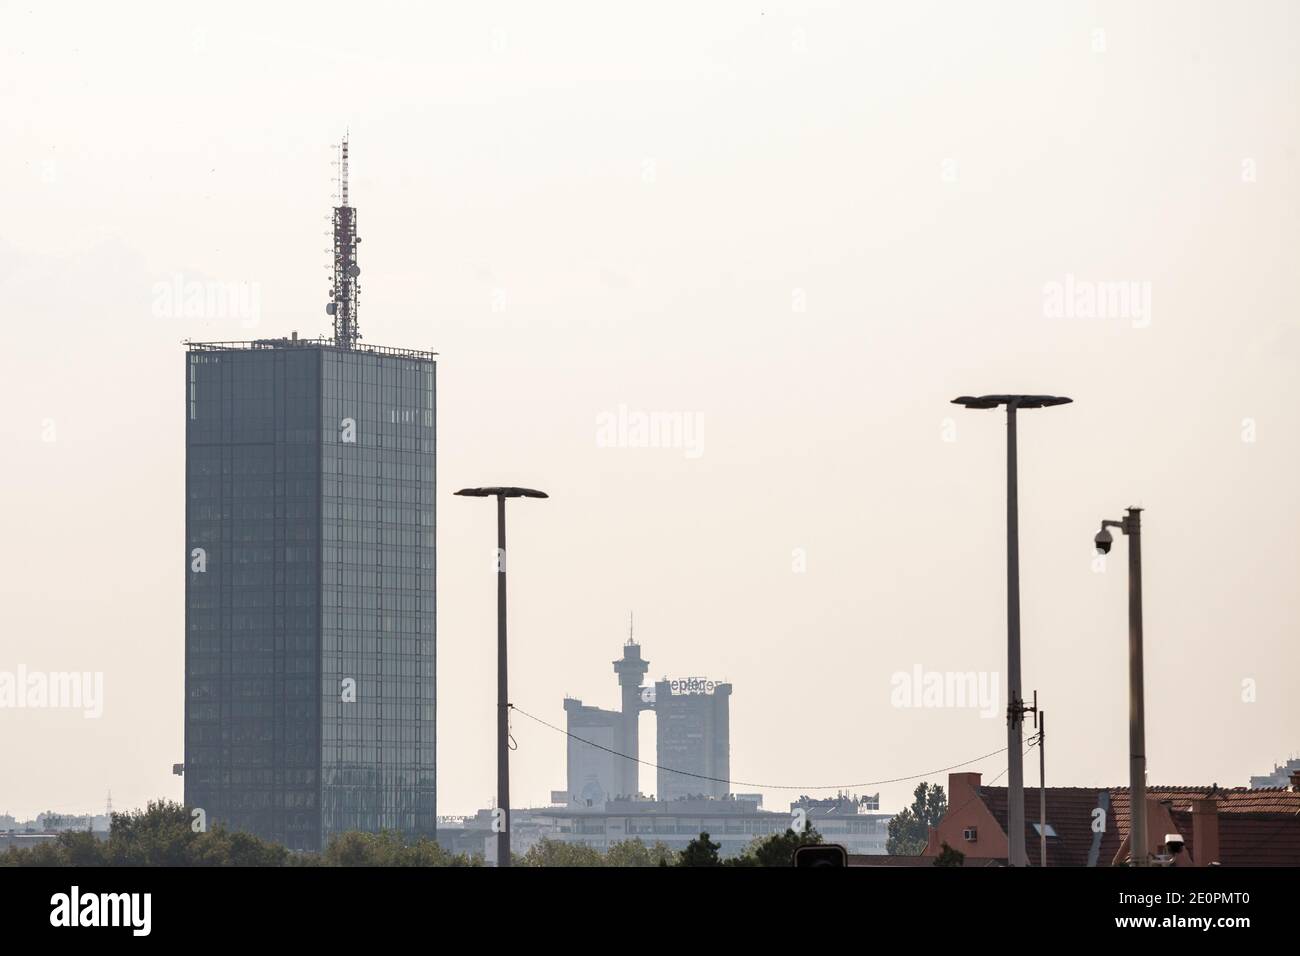 BELGRADE, SERBIA - AUGUST 21, 2018: Skyline and panorama New Belgrade (Novi Beograd) at sunset, with the Usce tower in front and the Genex tower, or Z Stock Photo